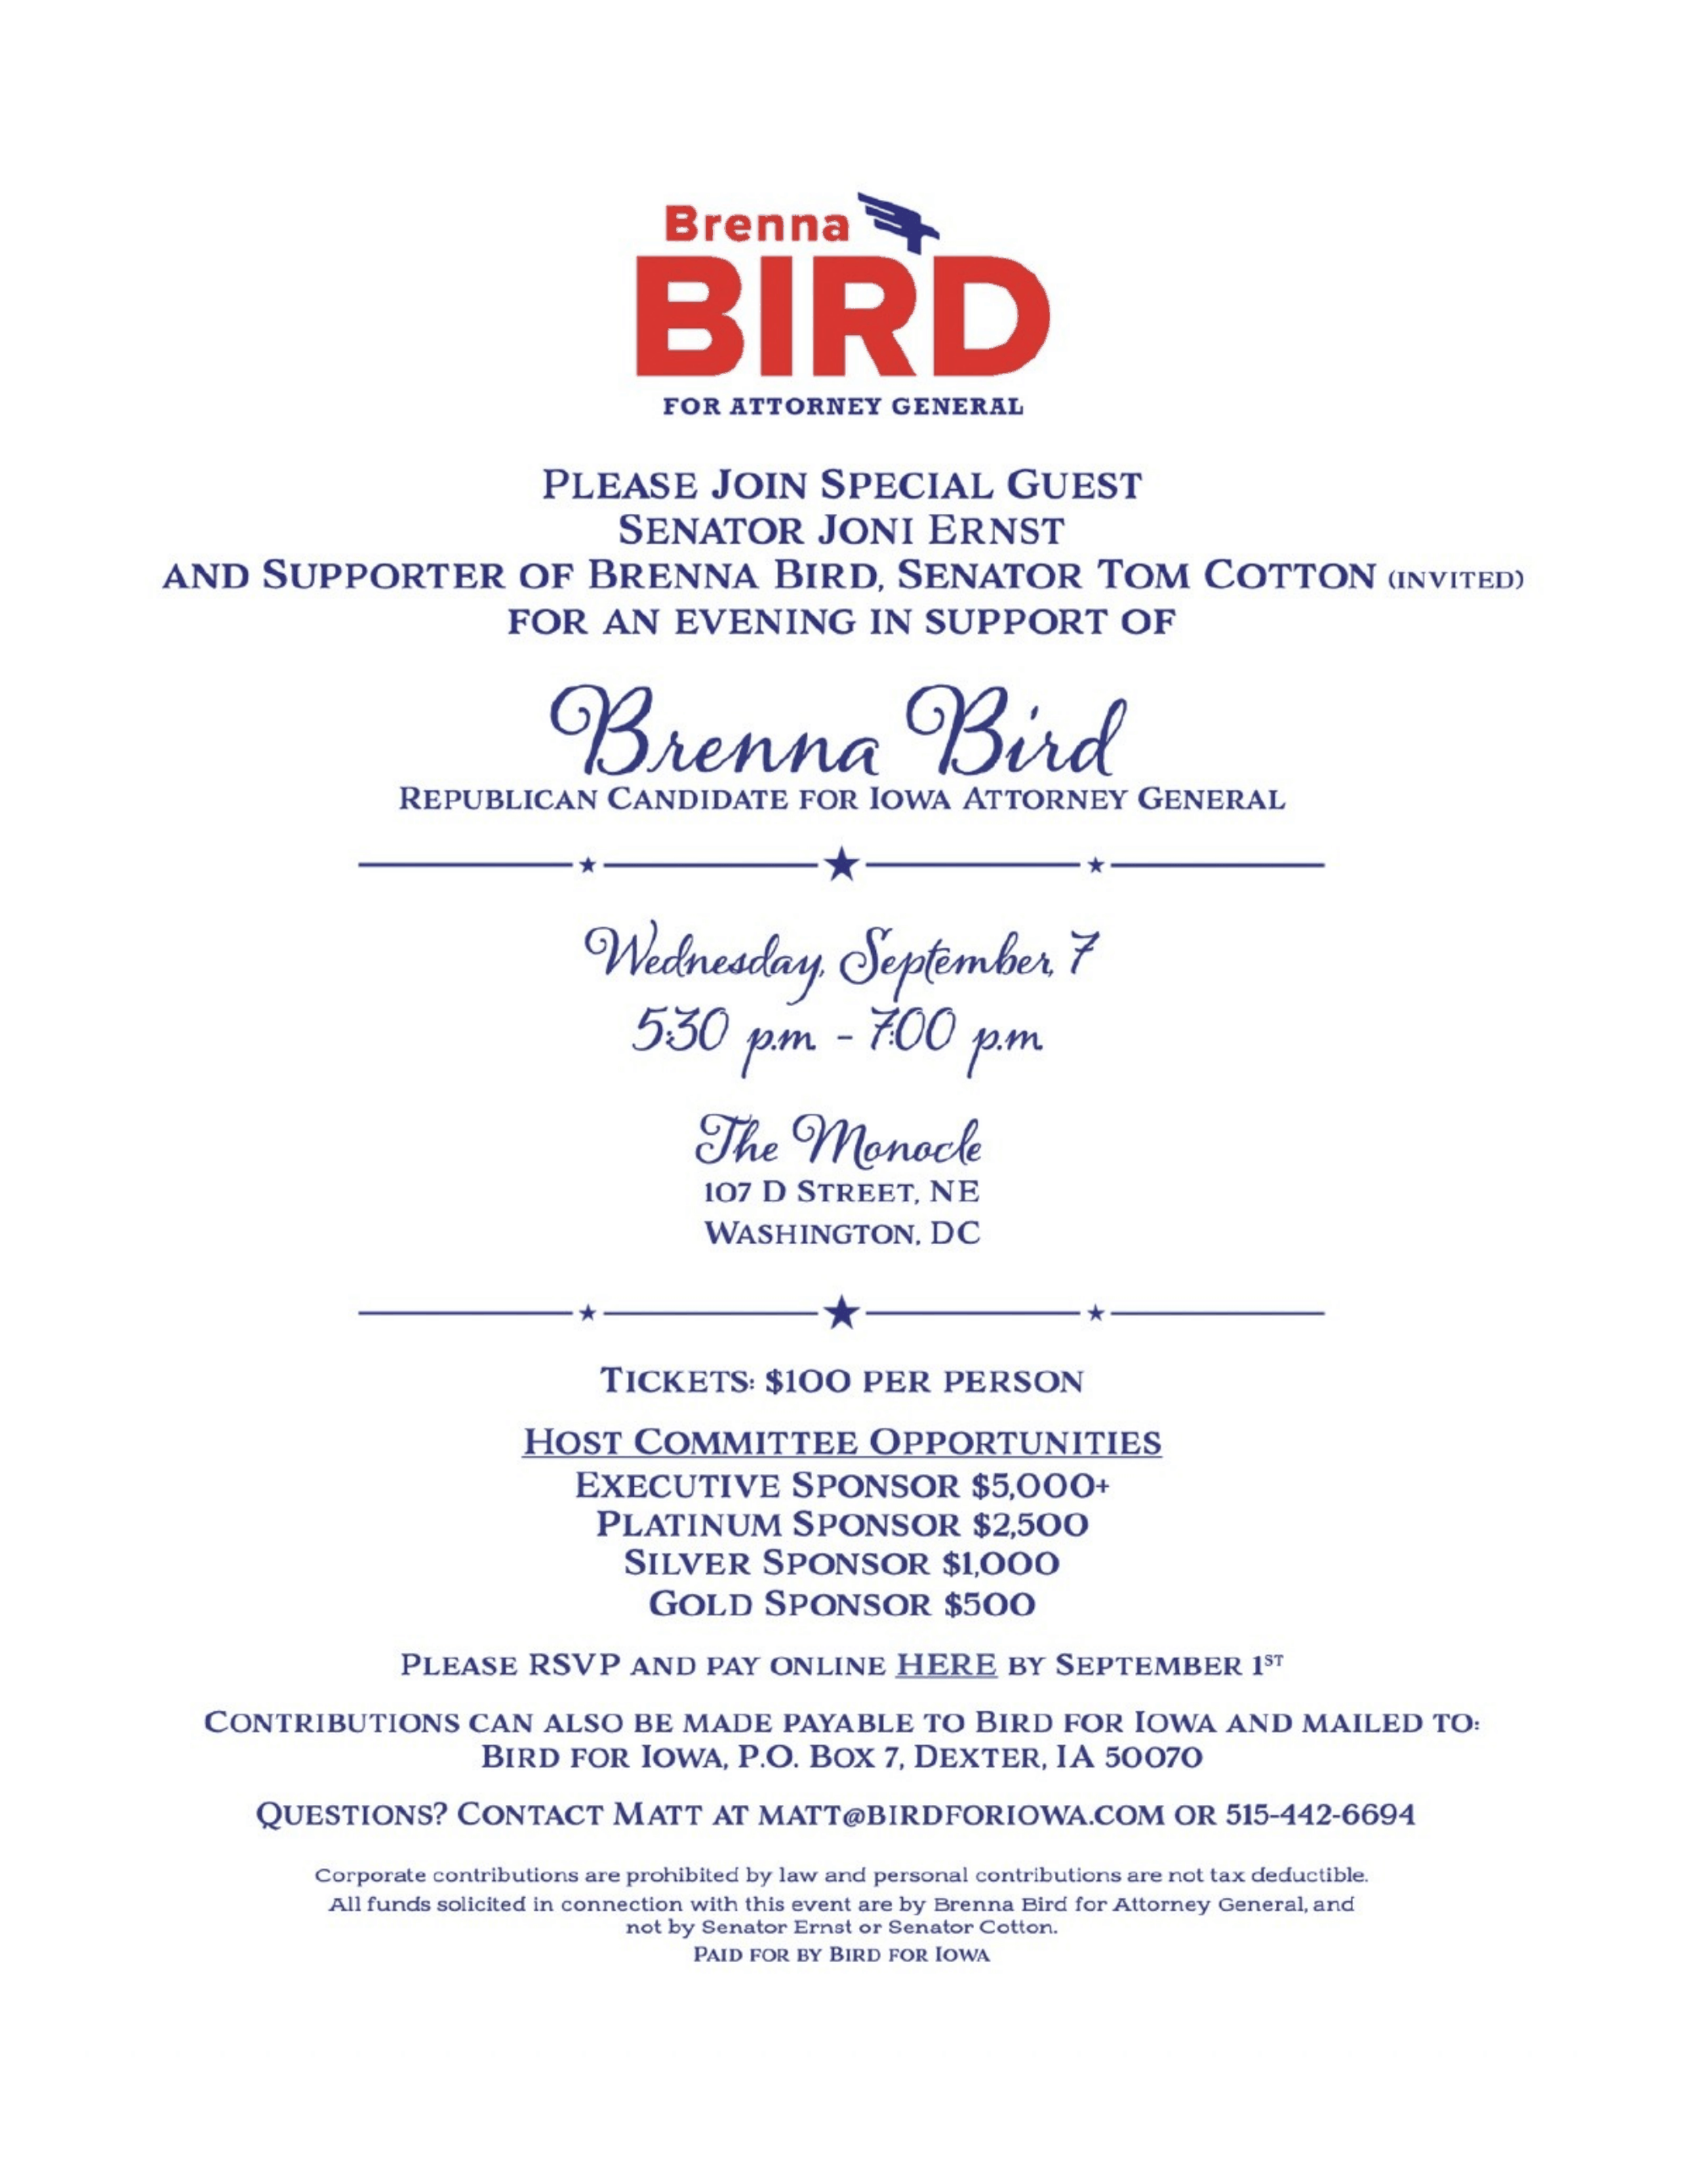 Page 1 of Fundraiser for Brenna Bird for Attorney General, 9.7.22